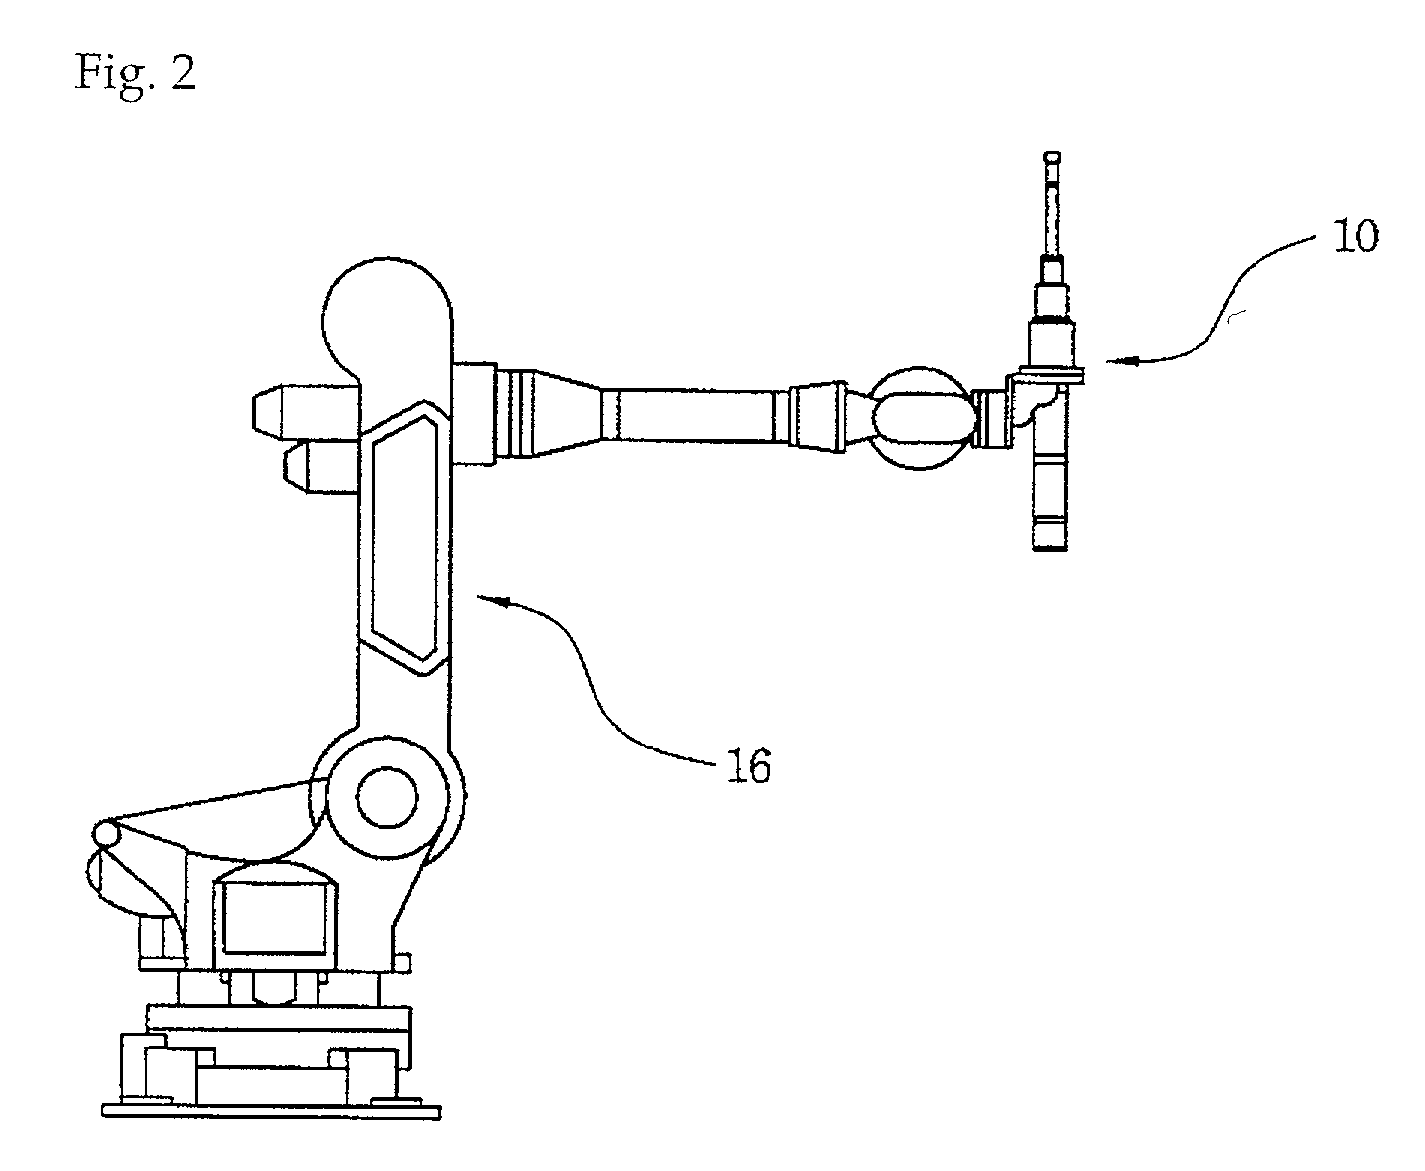 Floating tool changer for an automobile